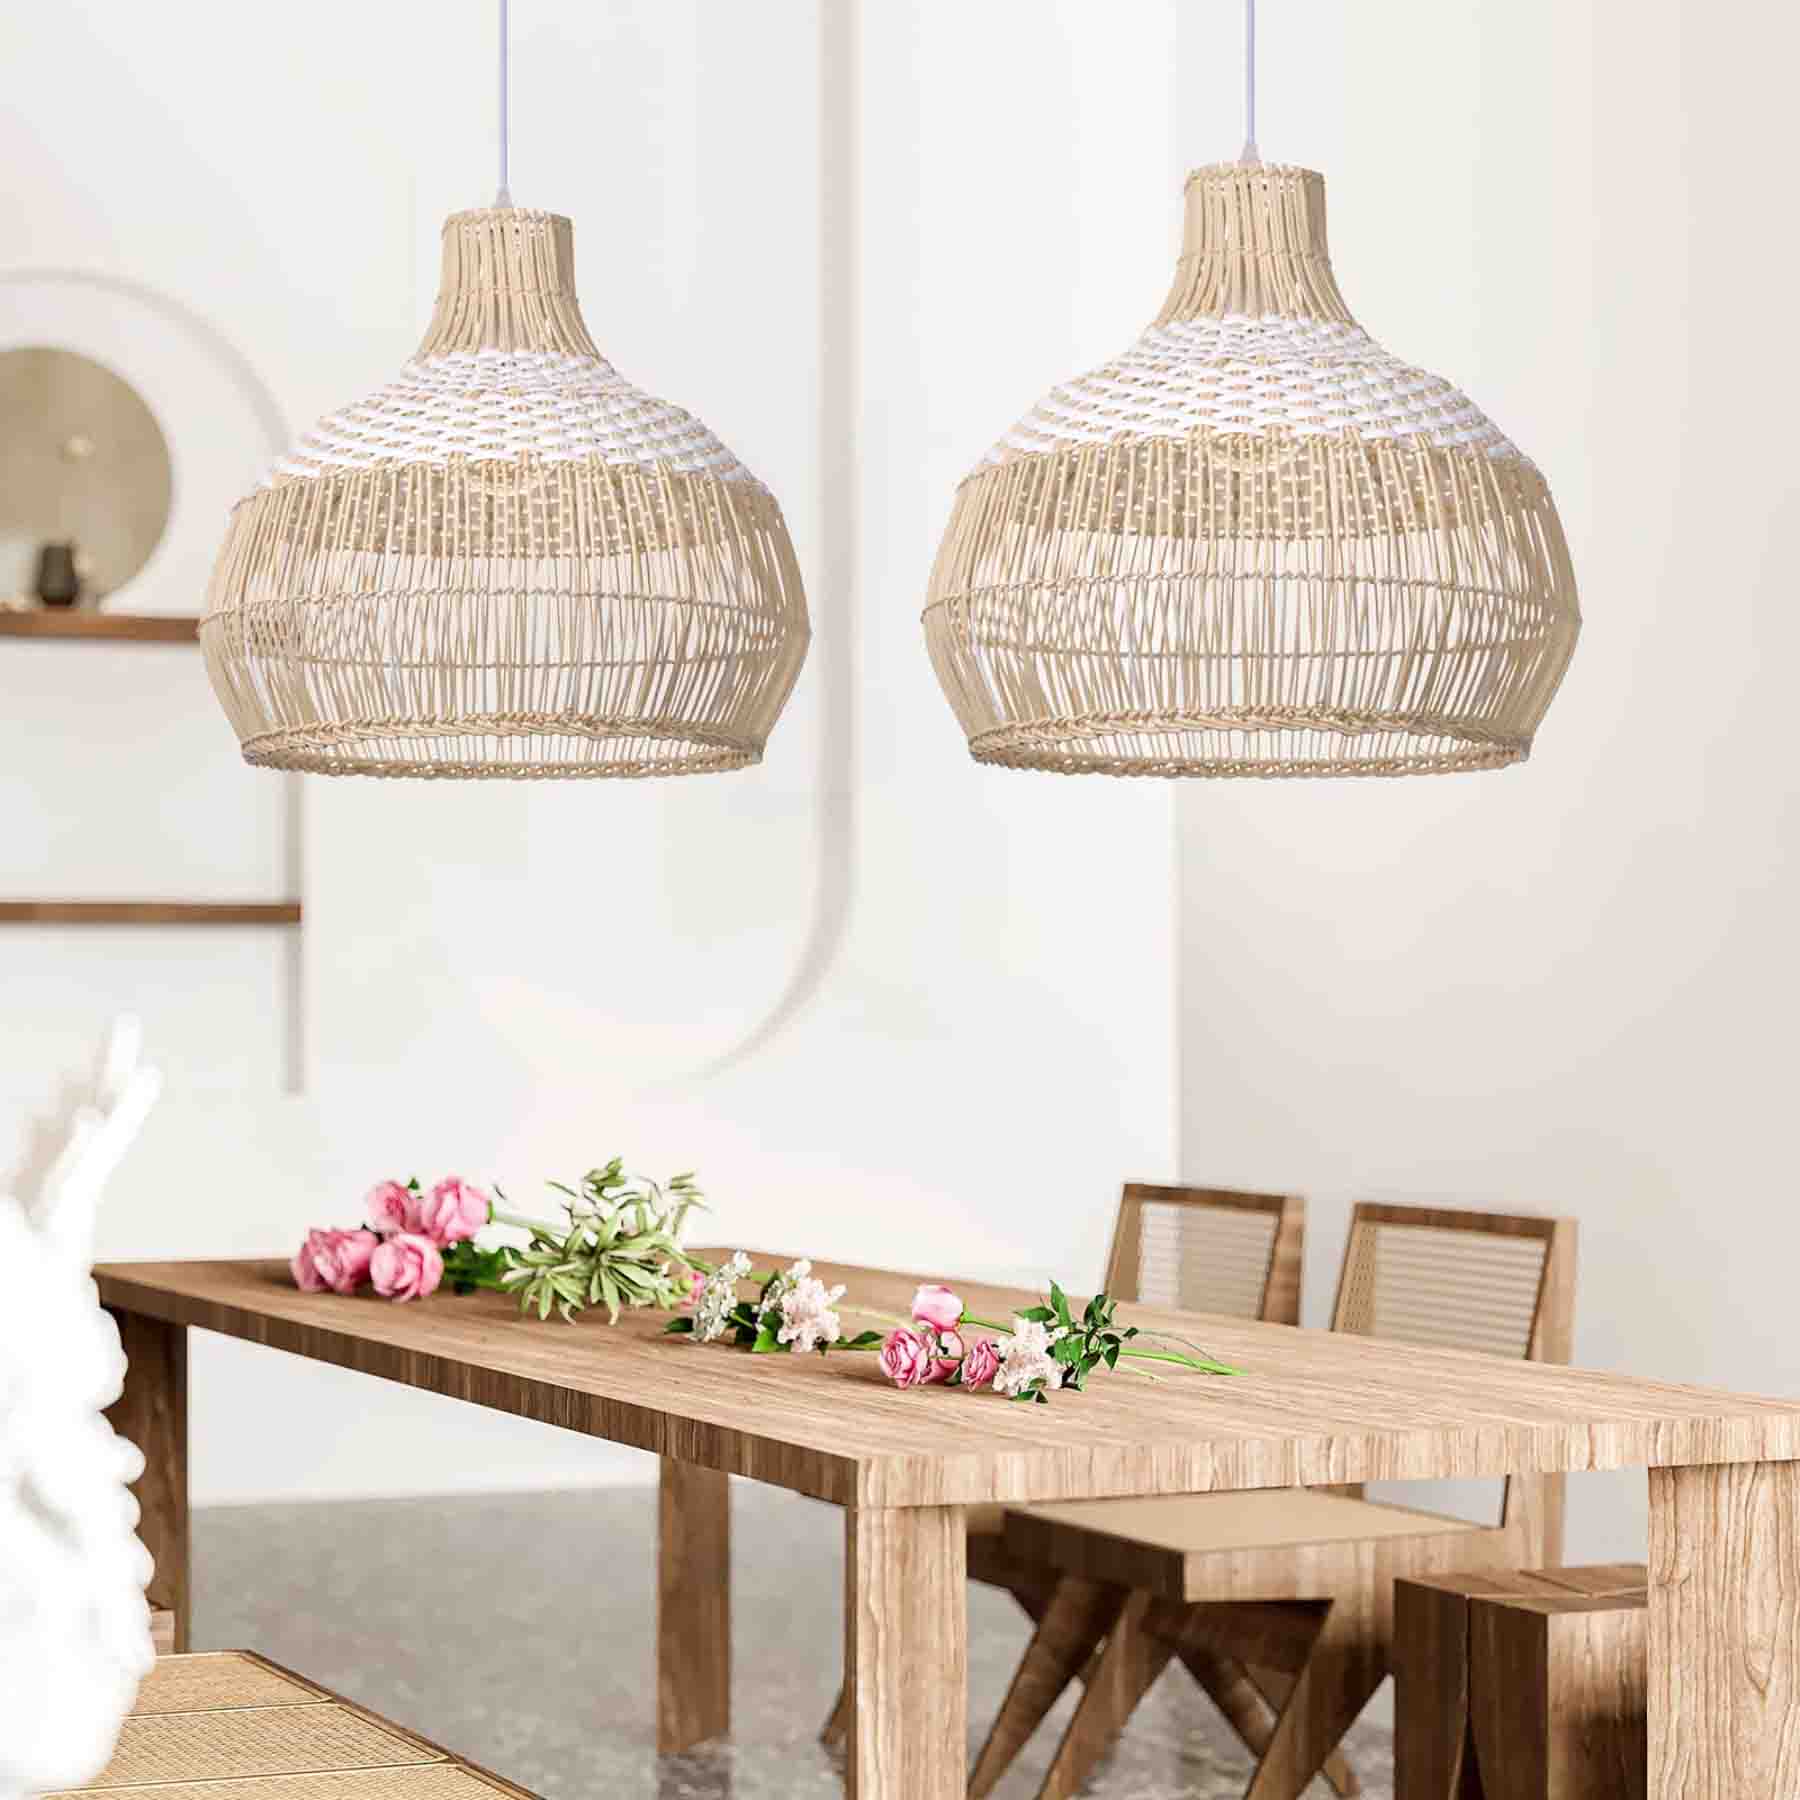 coastal style rattan pendant lights inspired by the calming beauty of the beach and seaside living bring a light and airy feel